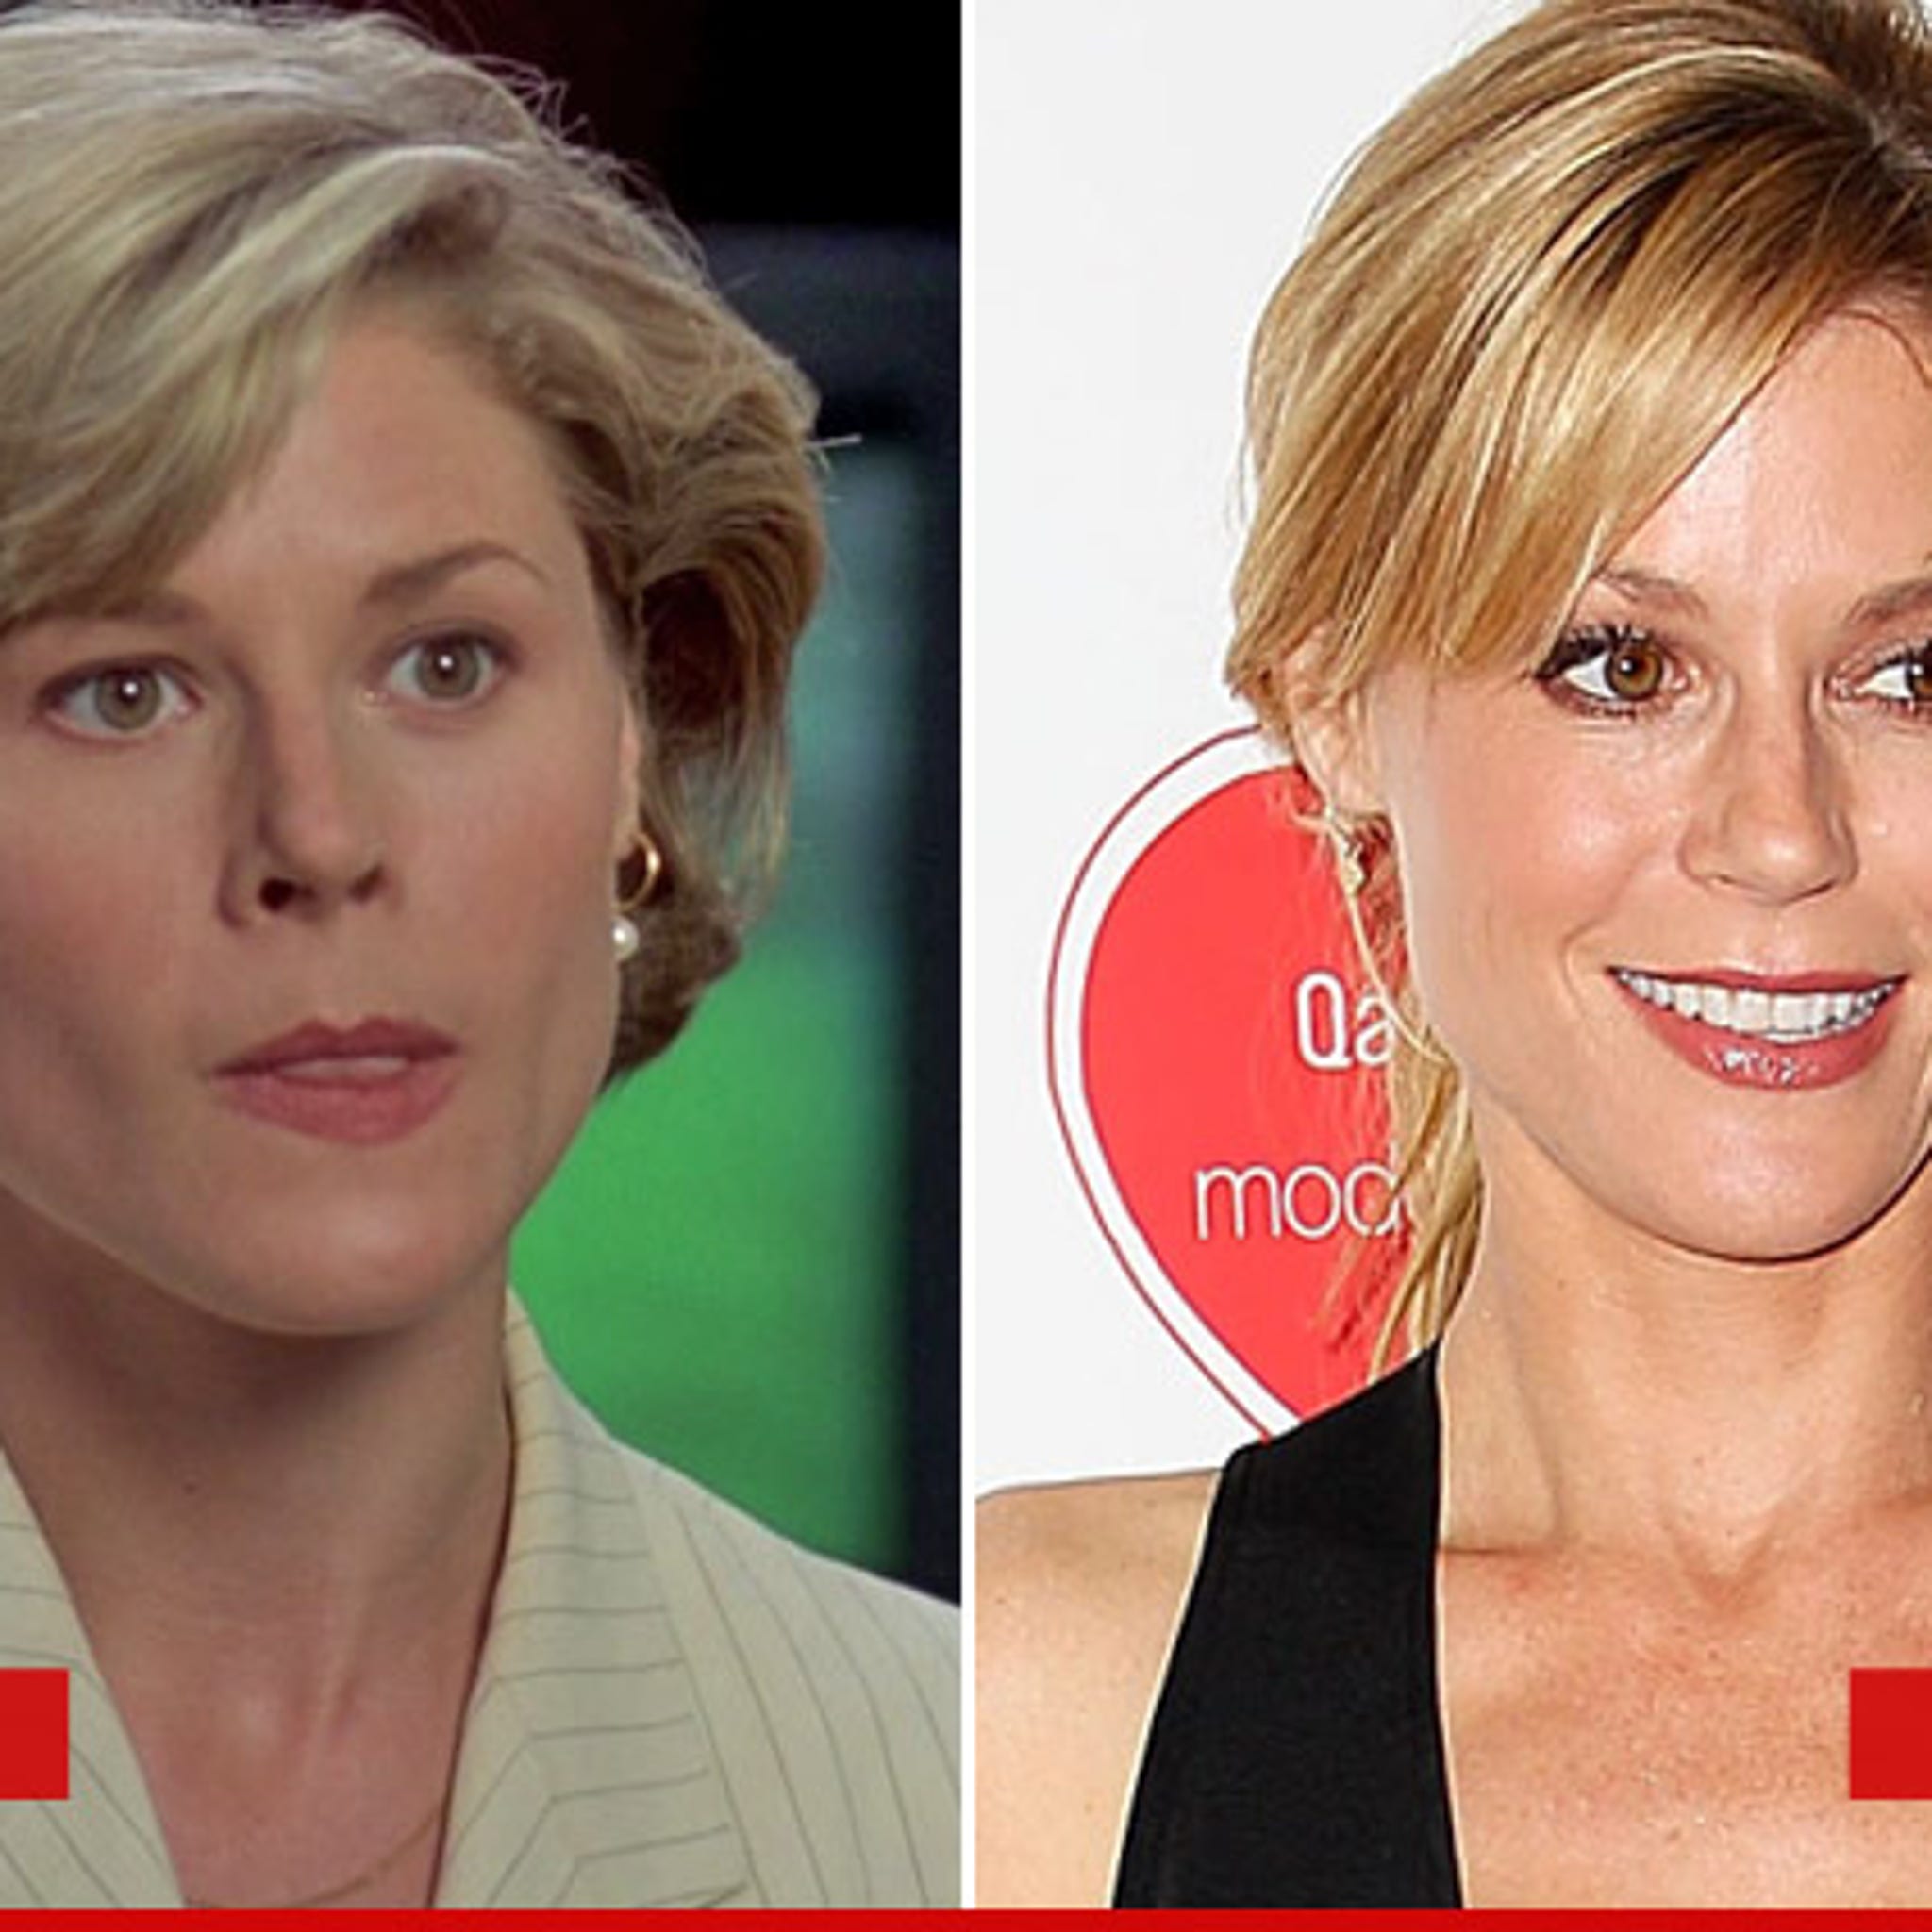 Julie Bowen wearing her hair in a loose knot at the nape of her neck